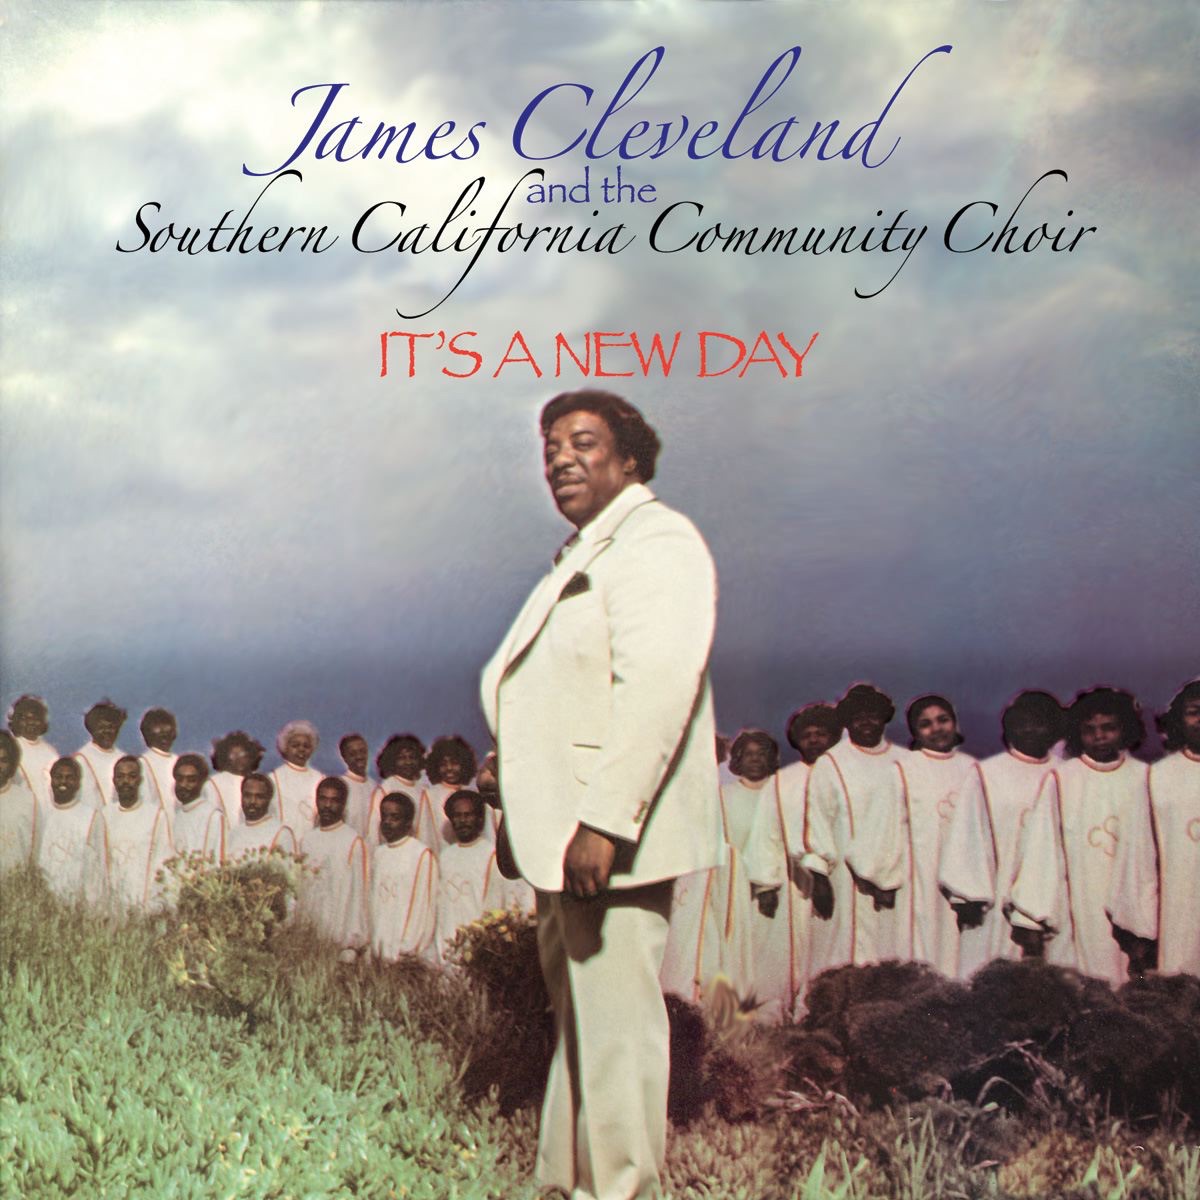 Art for God Is by Rev. James Cleveland & The Southern California Community Choir